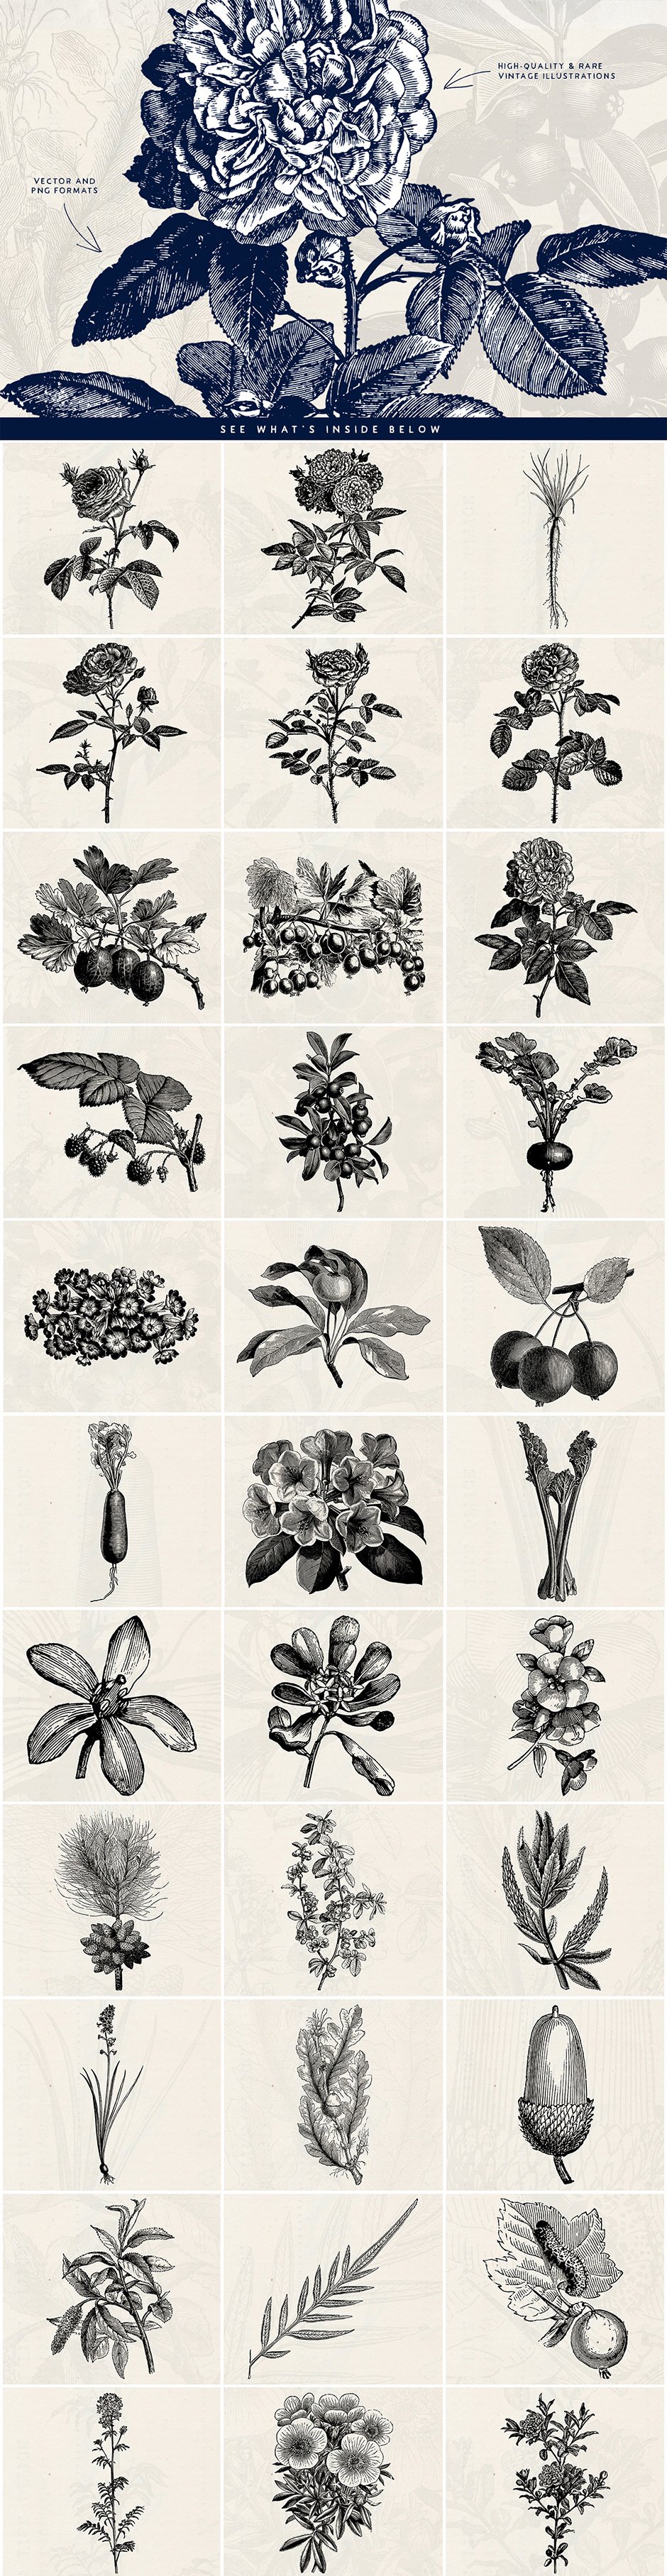 Fruit & Flower Illustrations and more!